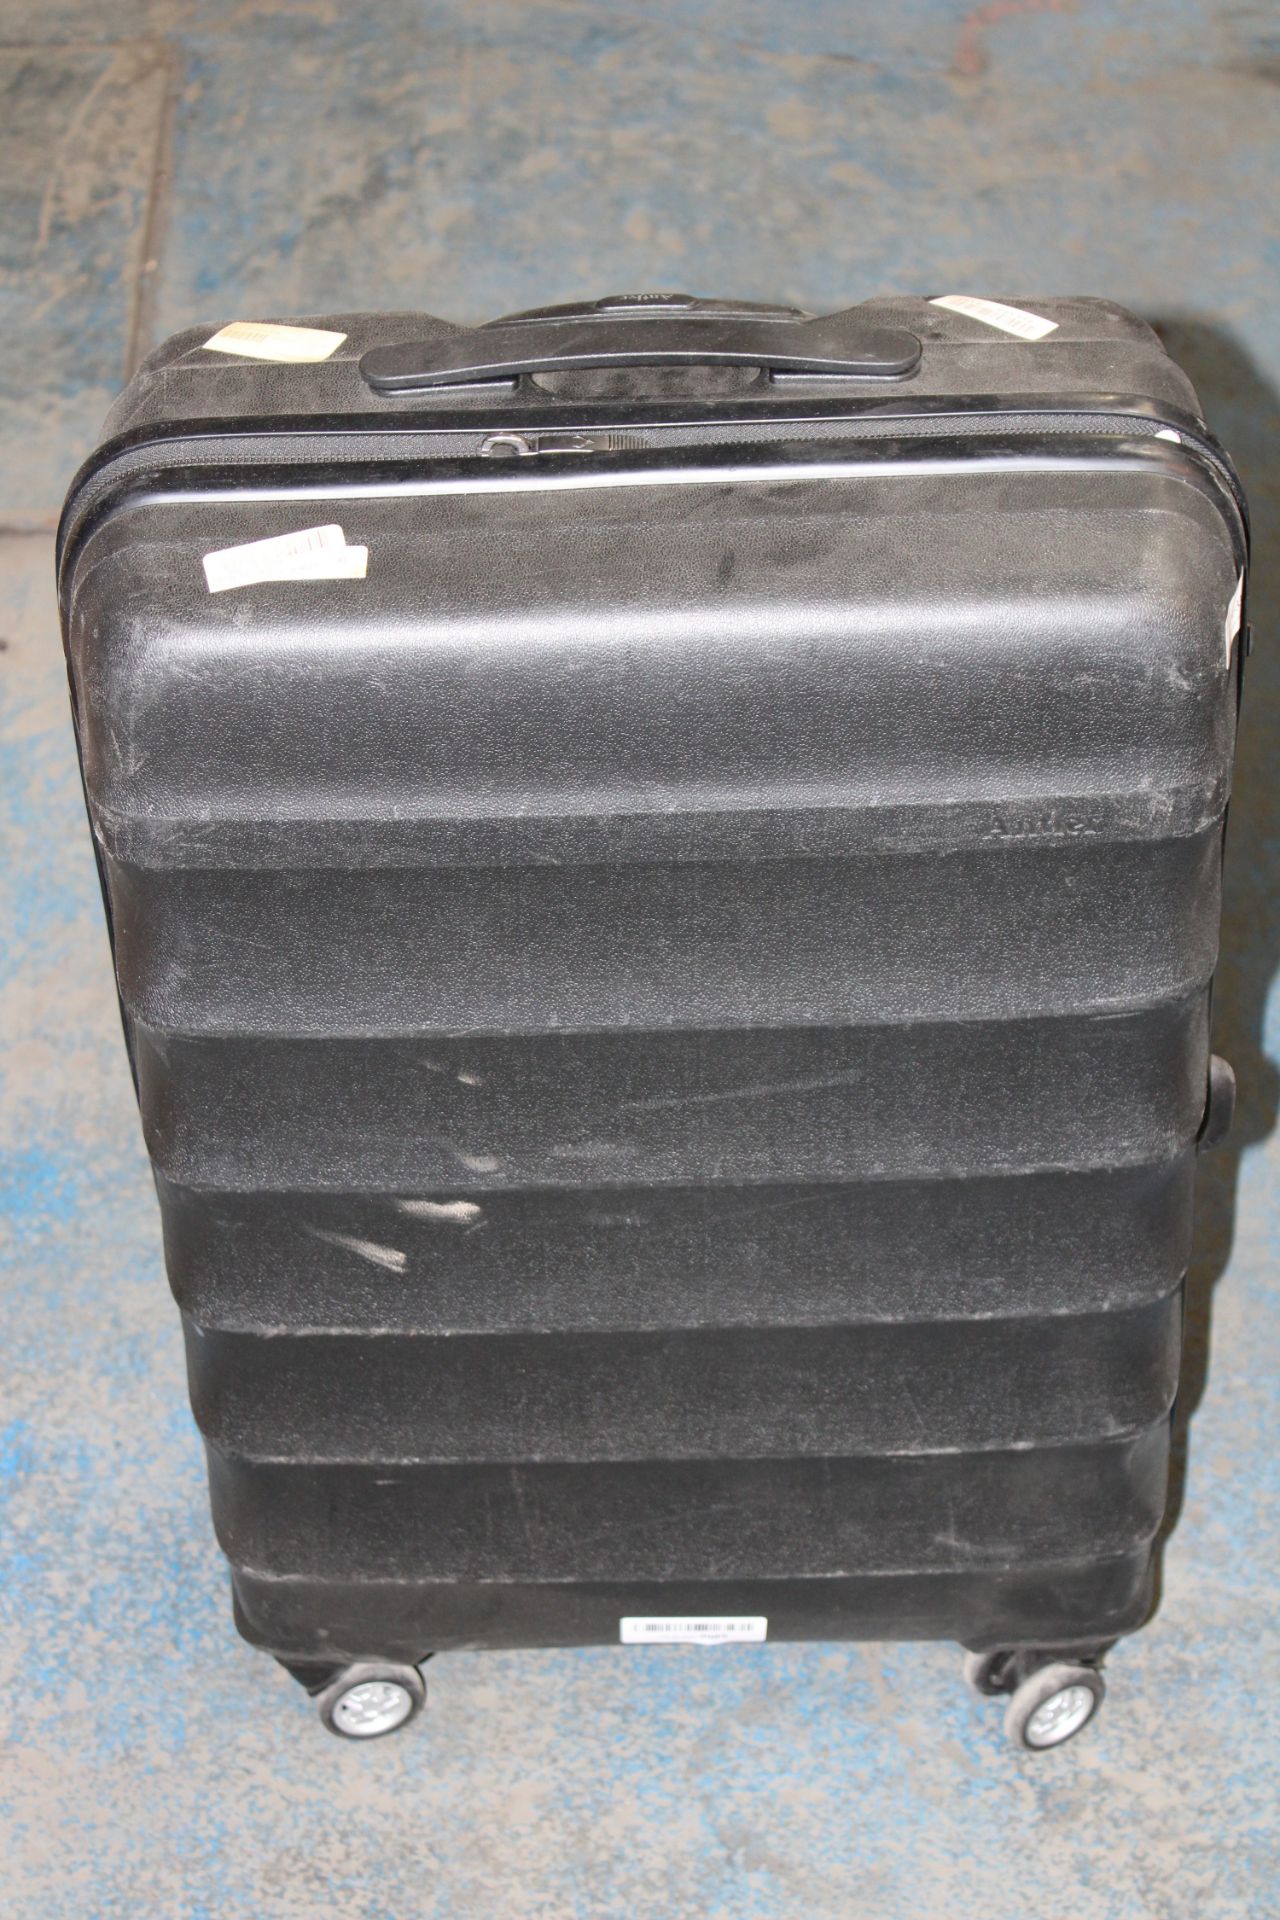 UNBOXED HARD SHELLED WHEELED SUITCASE Condition Report Appraisal Available on Request- All Items are